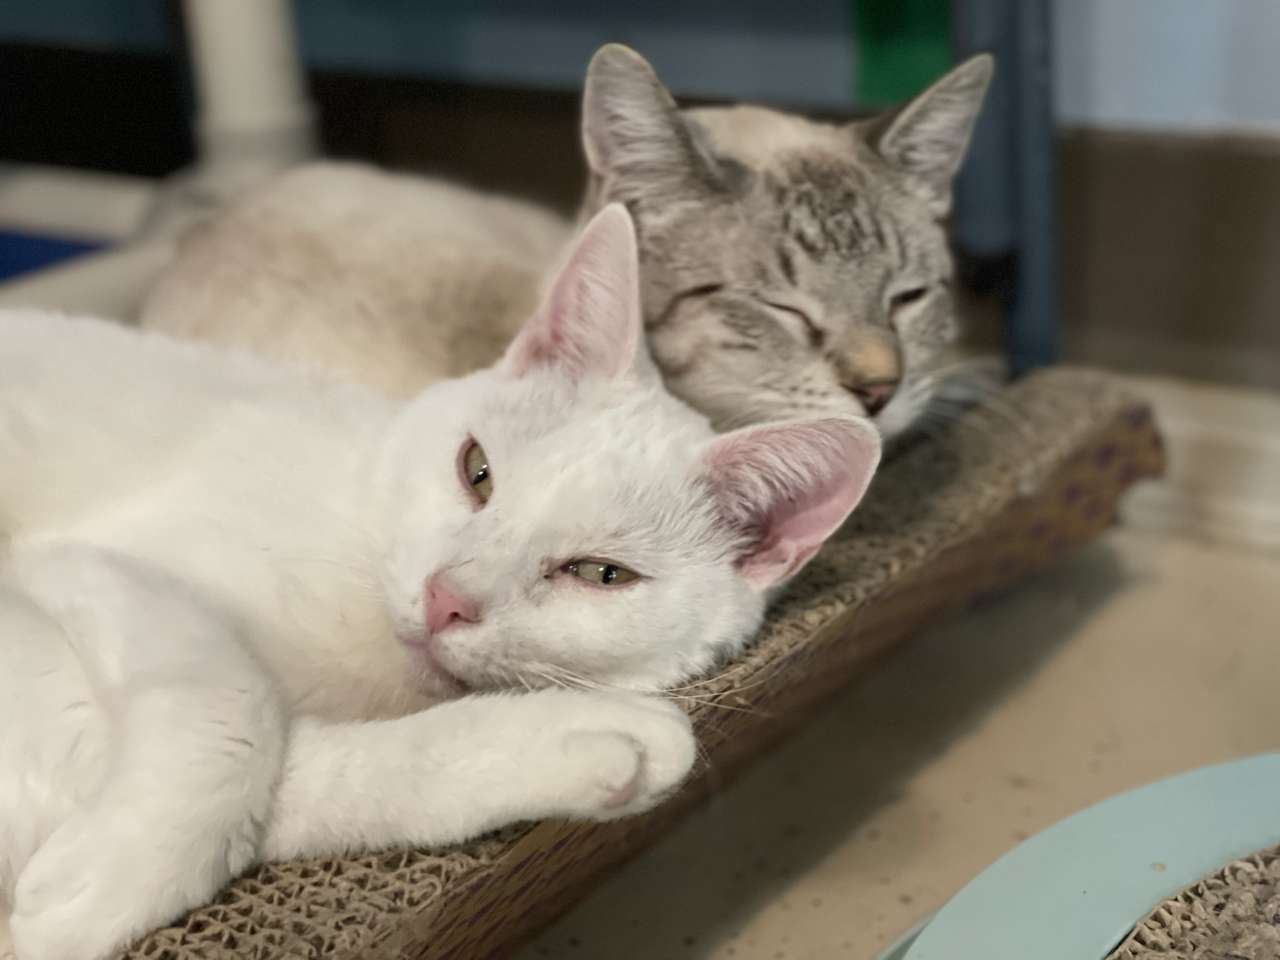 2 cats cuddling together nicely puzzle online from photo